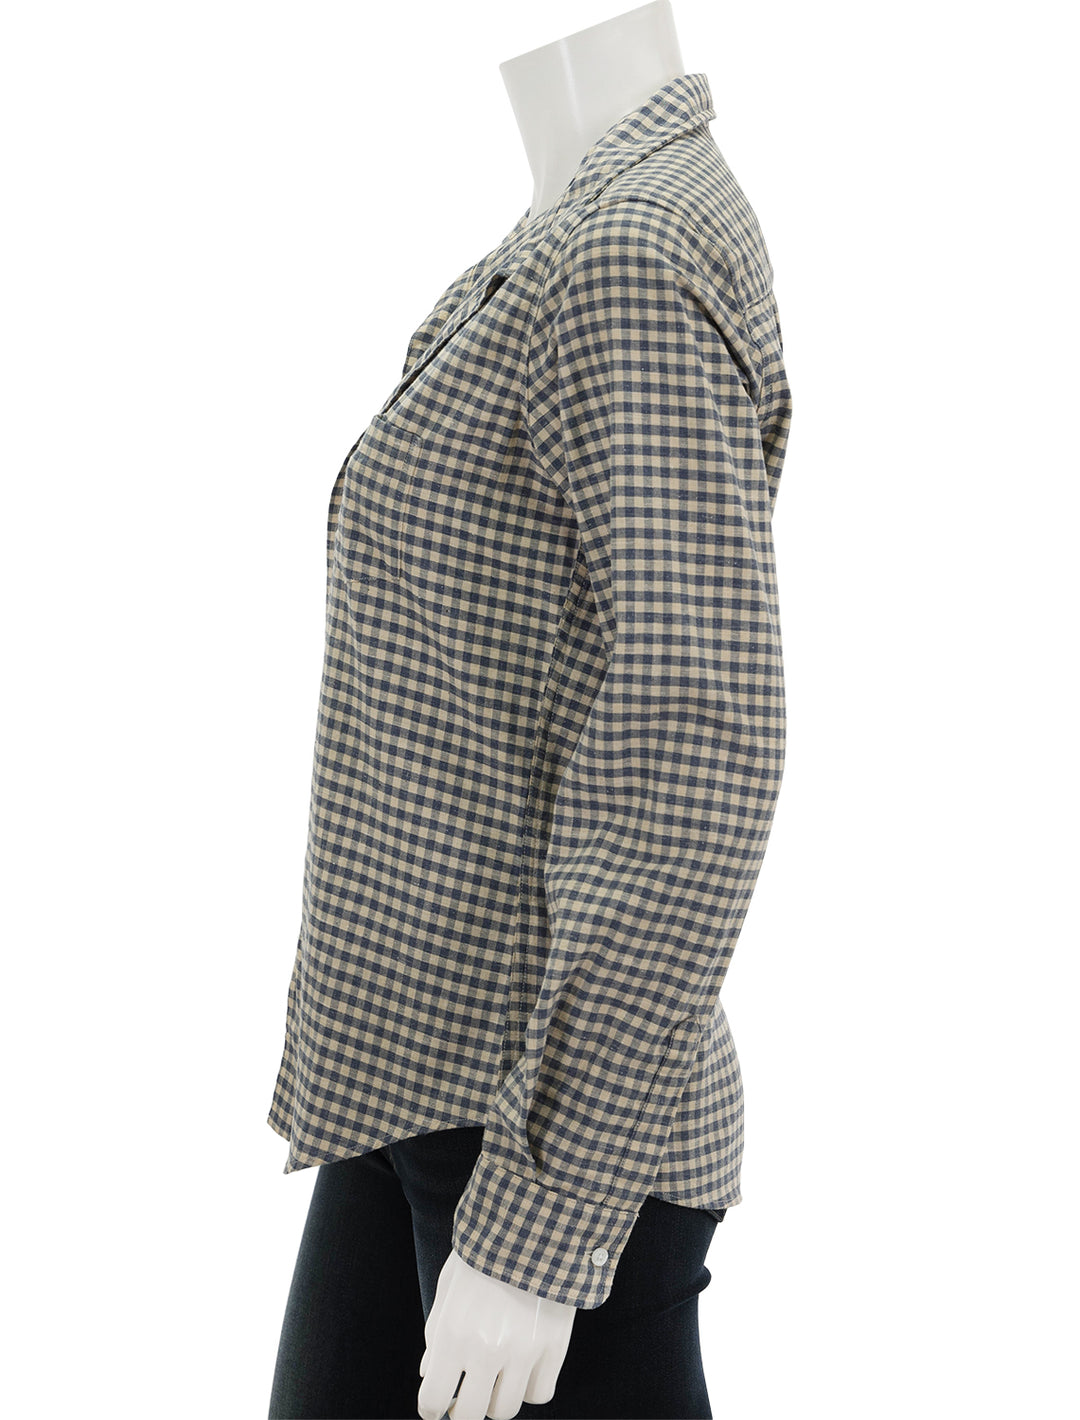 Side view of Frank & Eileen's barry shirt in natural and blue check.